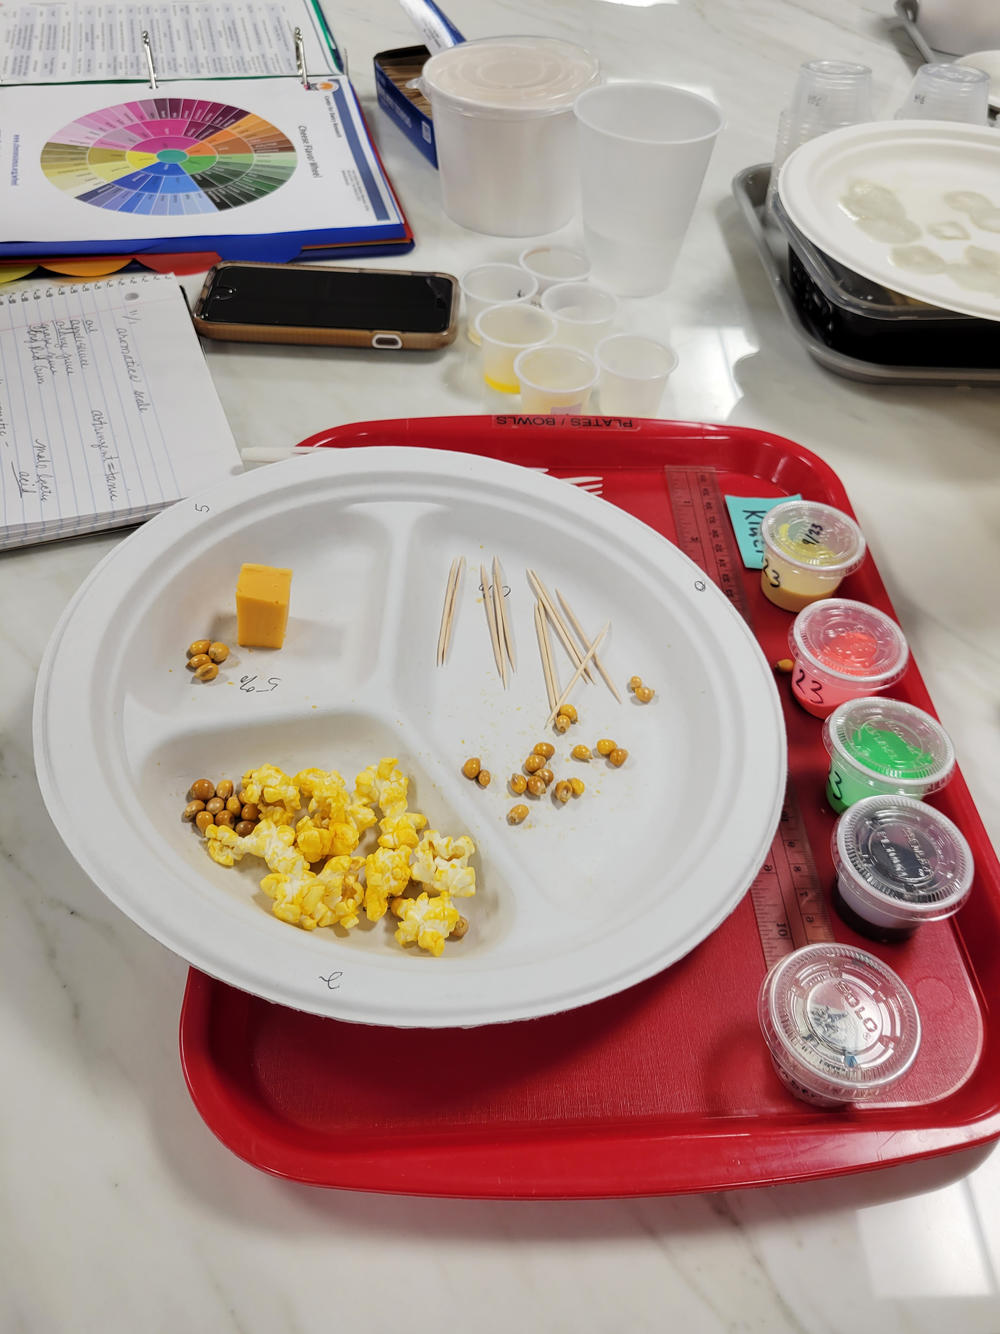 Cheese tasters are given microwave buttered popcorn, a flavor color wheel and sample cups to determine the cheese's butteriness and texture.